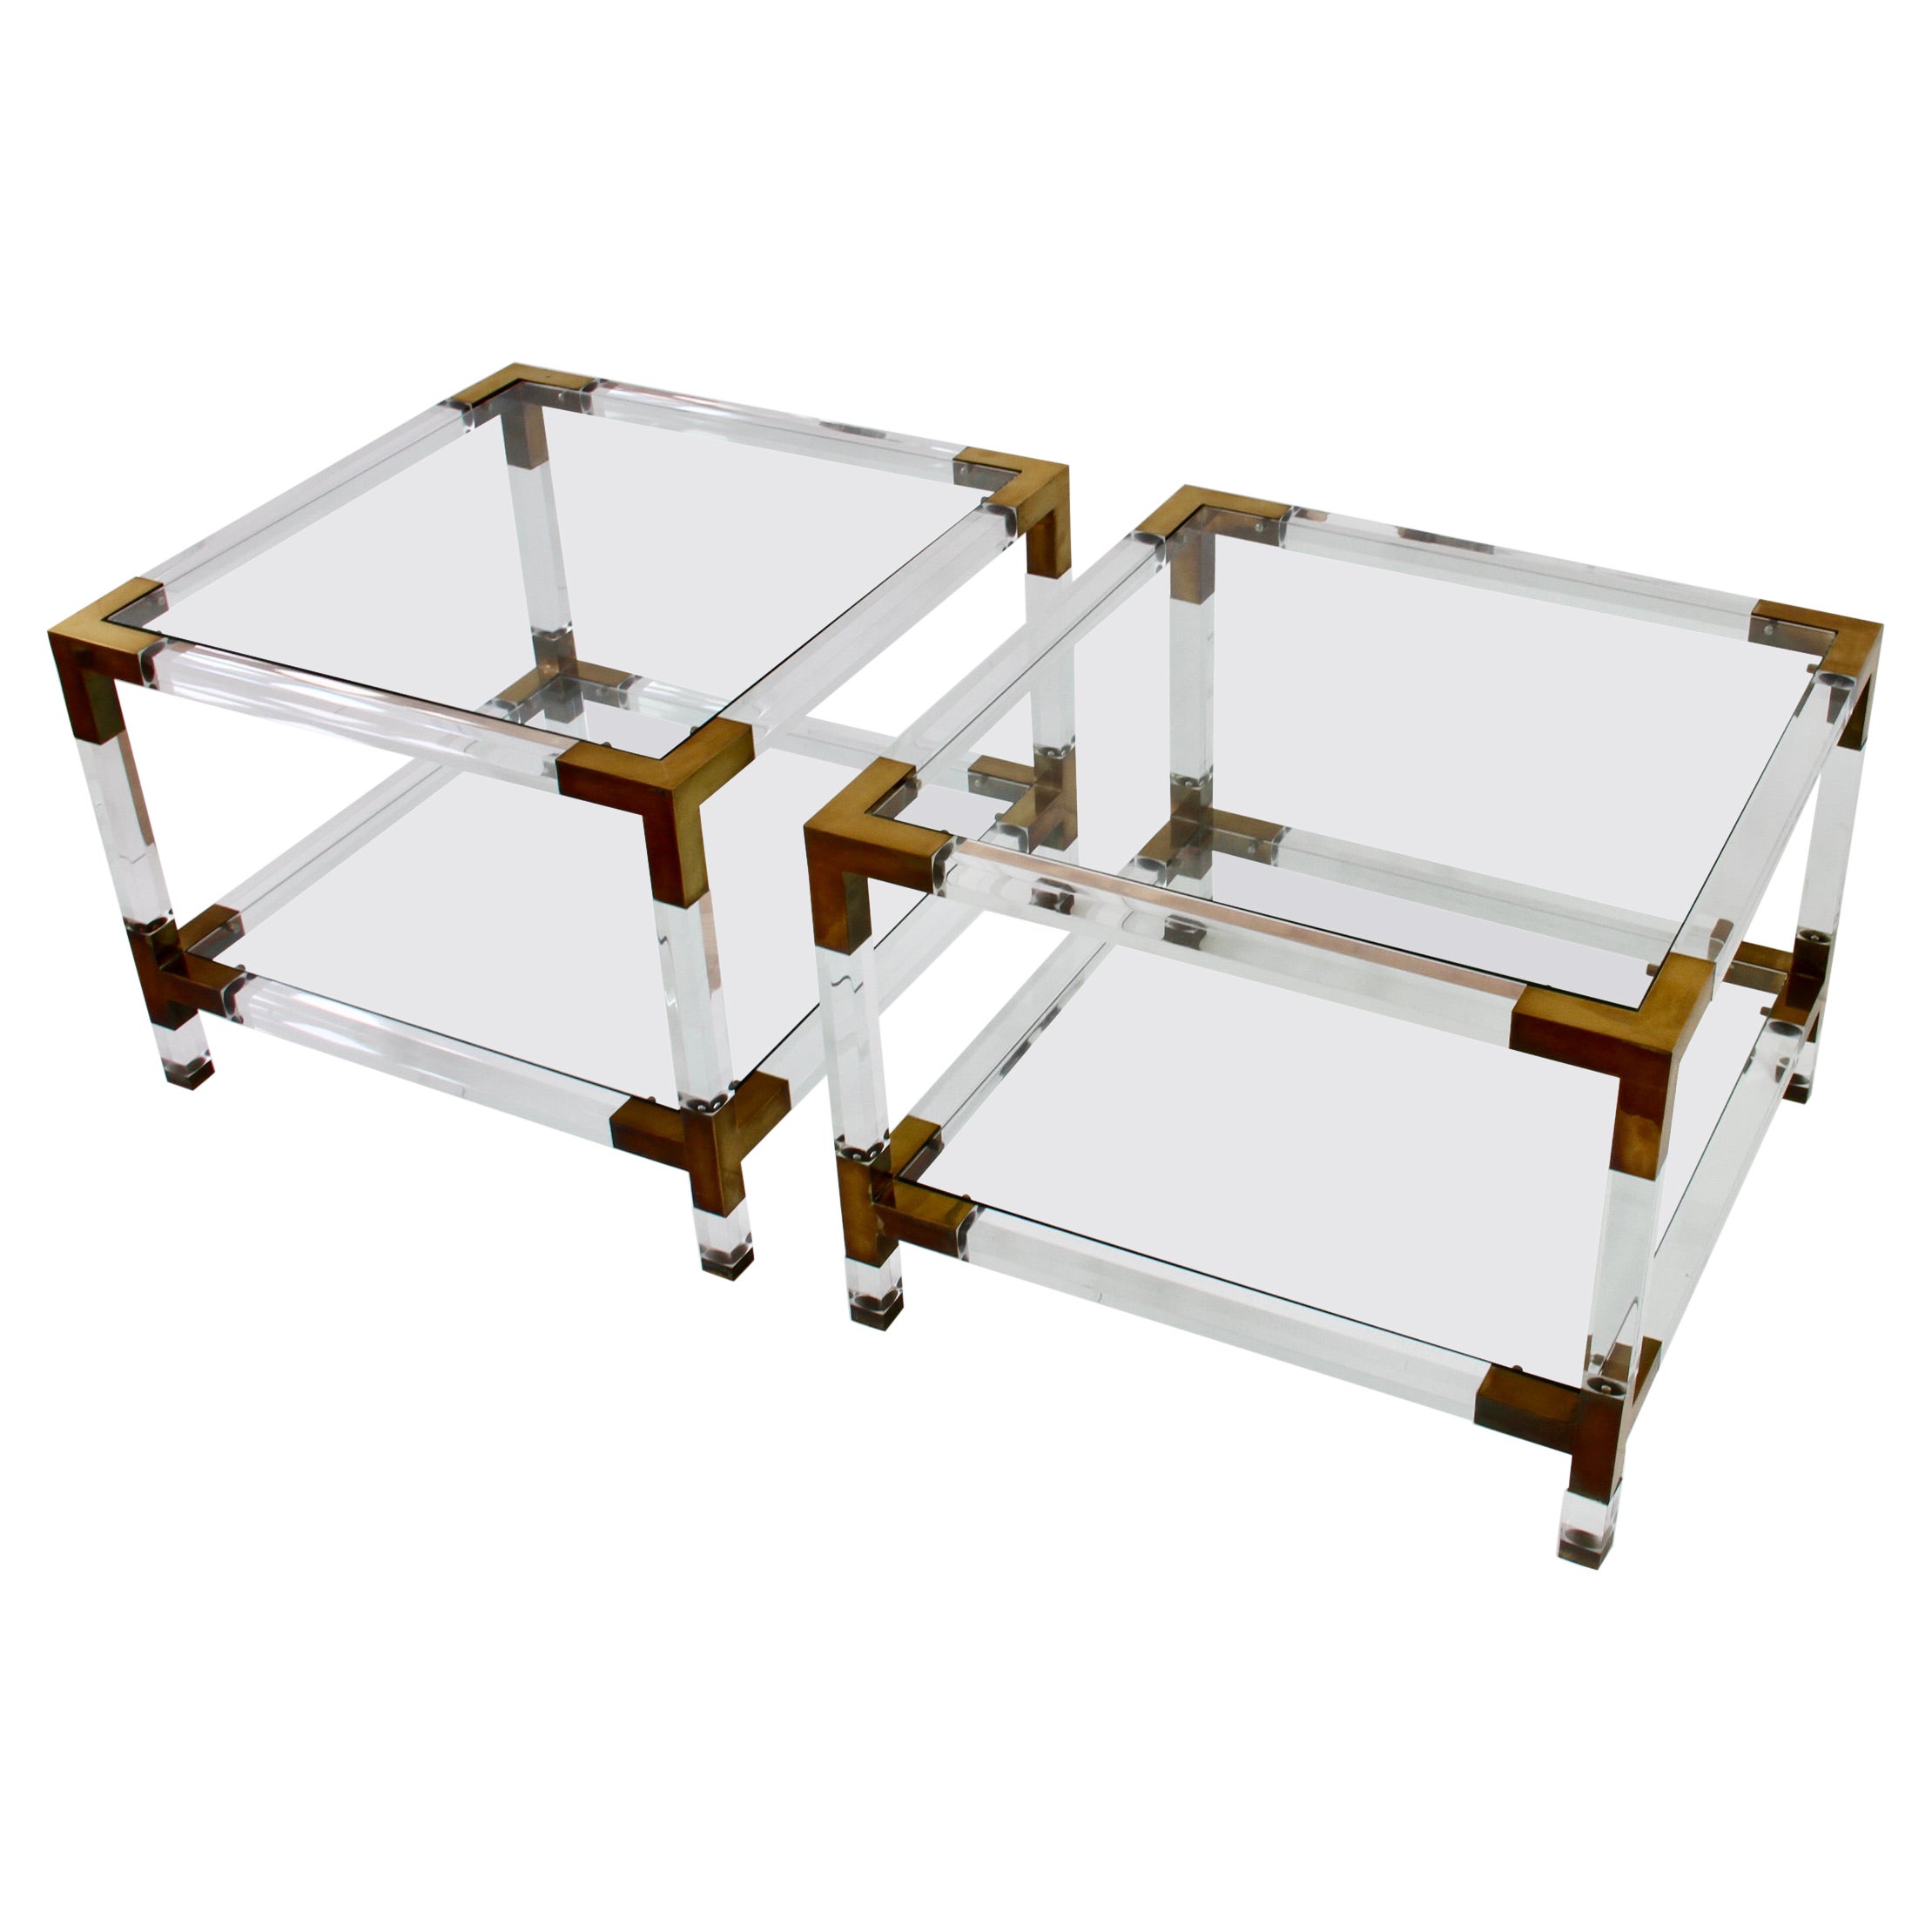 Pair of Hollis Jones Style Vintage Acrylic/Lucite Brass Side Tables, circa 1970s